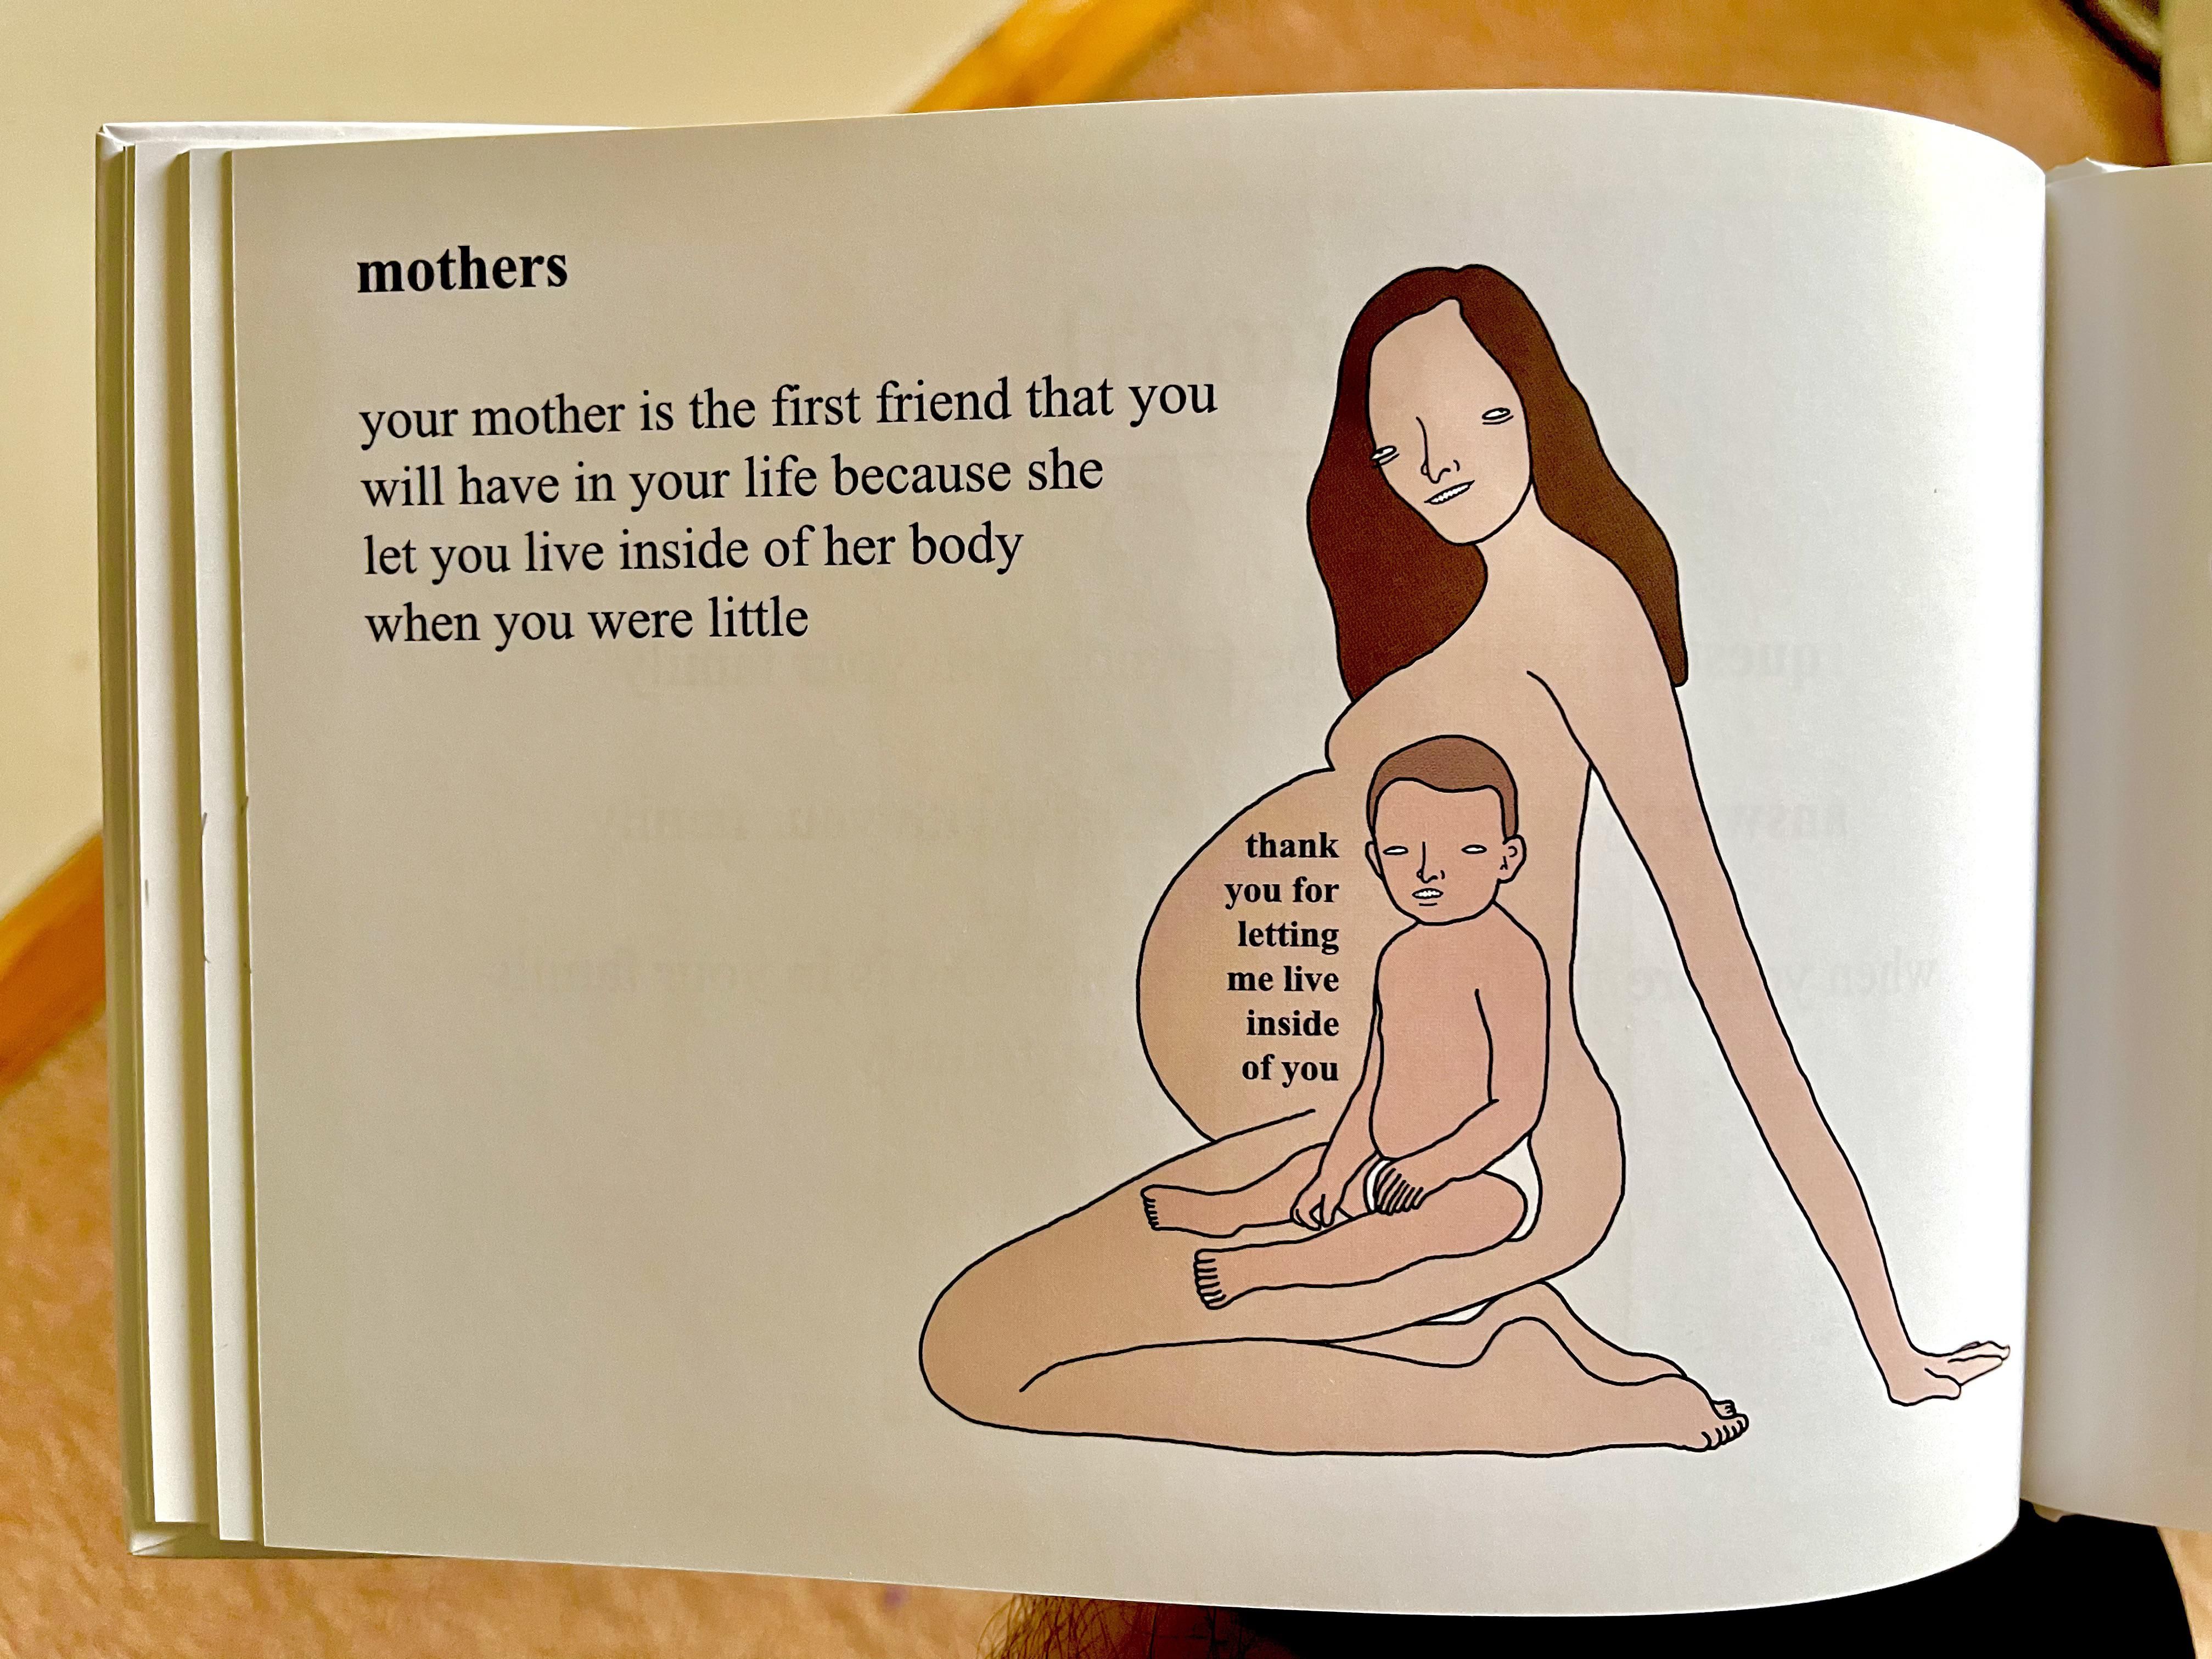 Is this pregnancy book accurate?